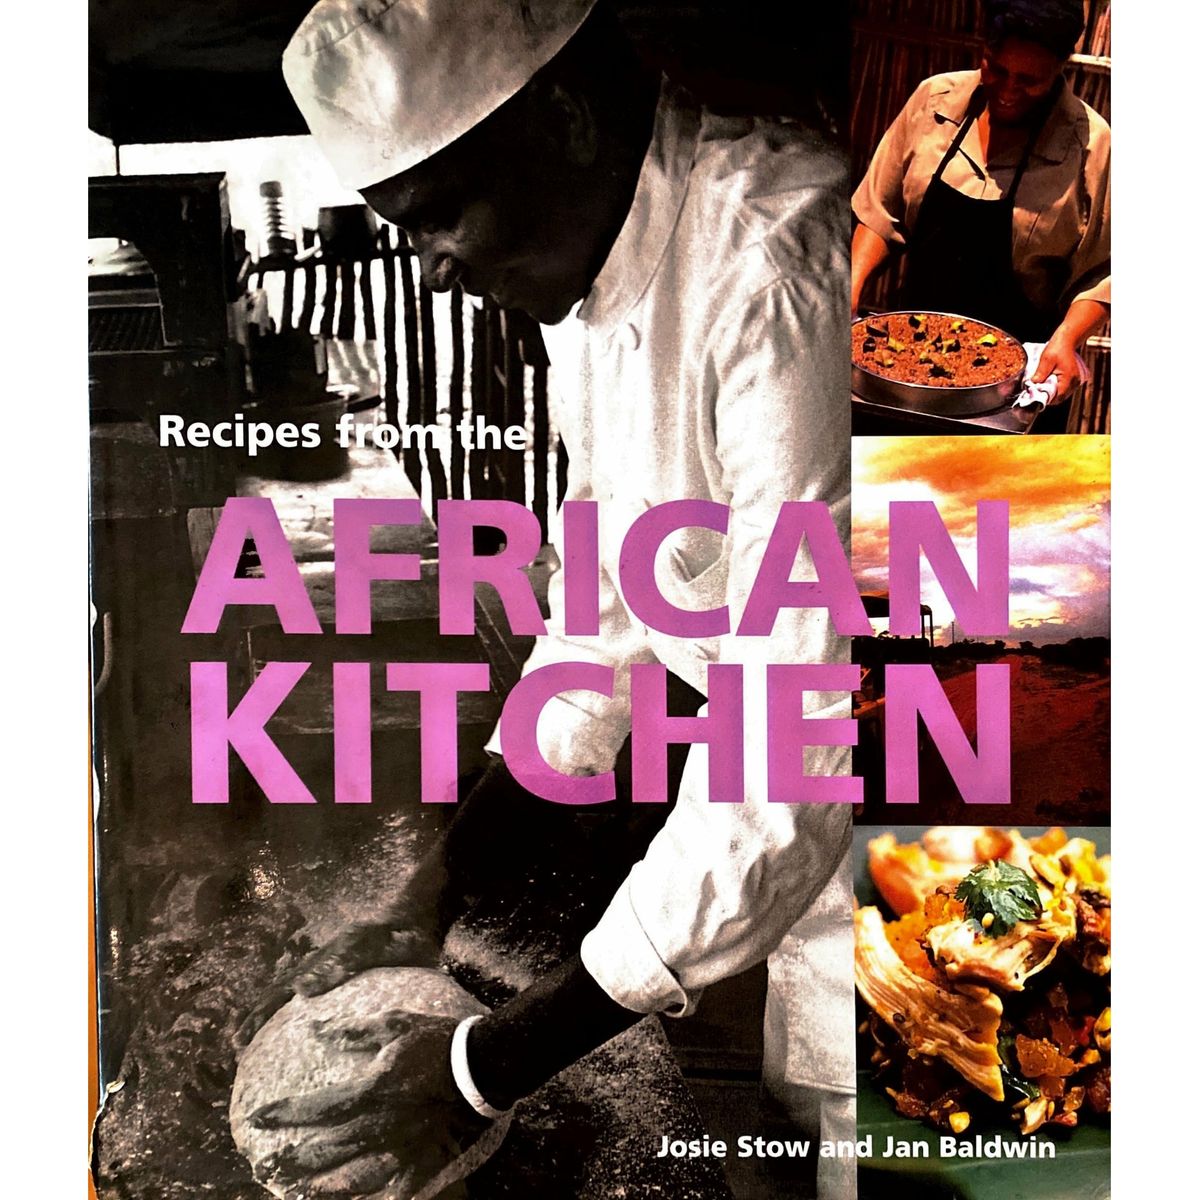 ISBN: 9781856262538 / 1856262537 - Recipes from The African Kitchen by Josie Stow & Jan Baldwin [2007]